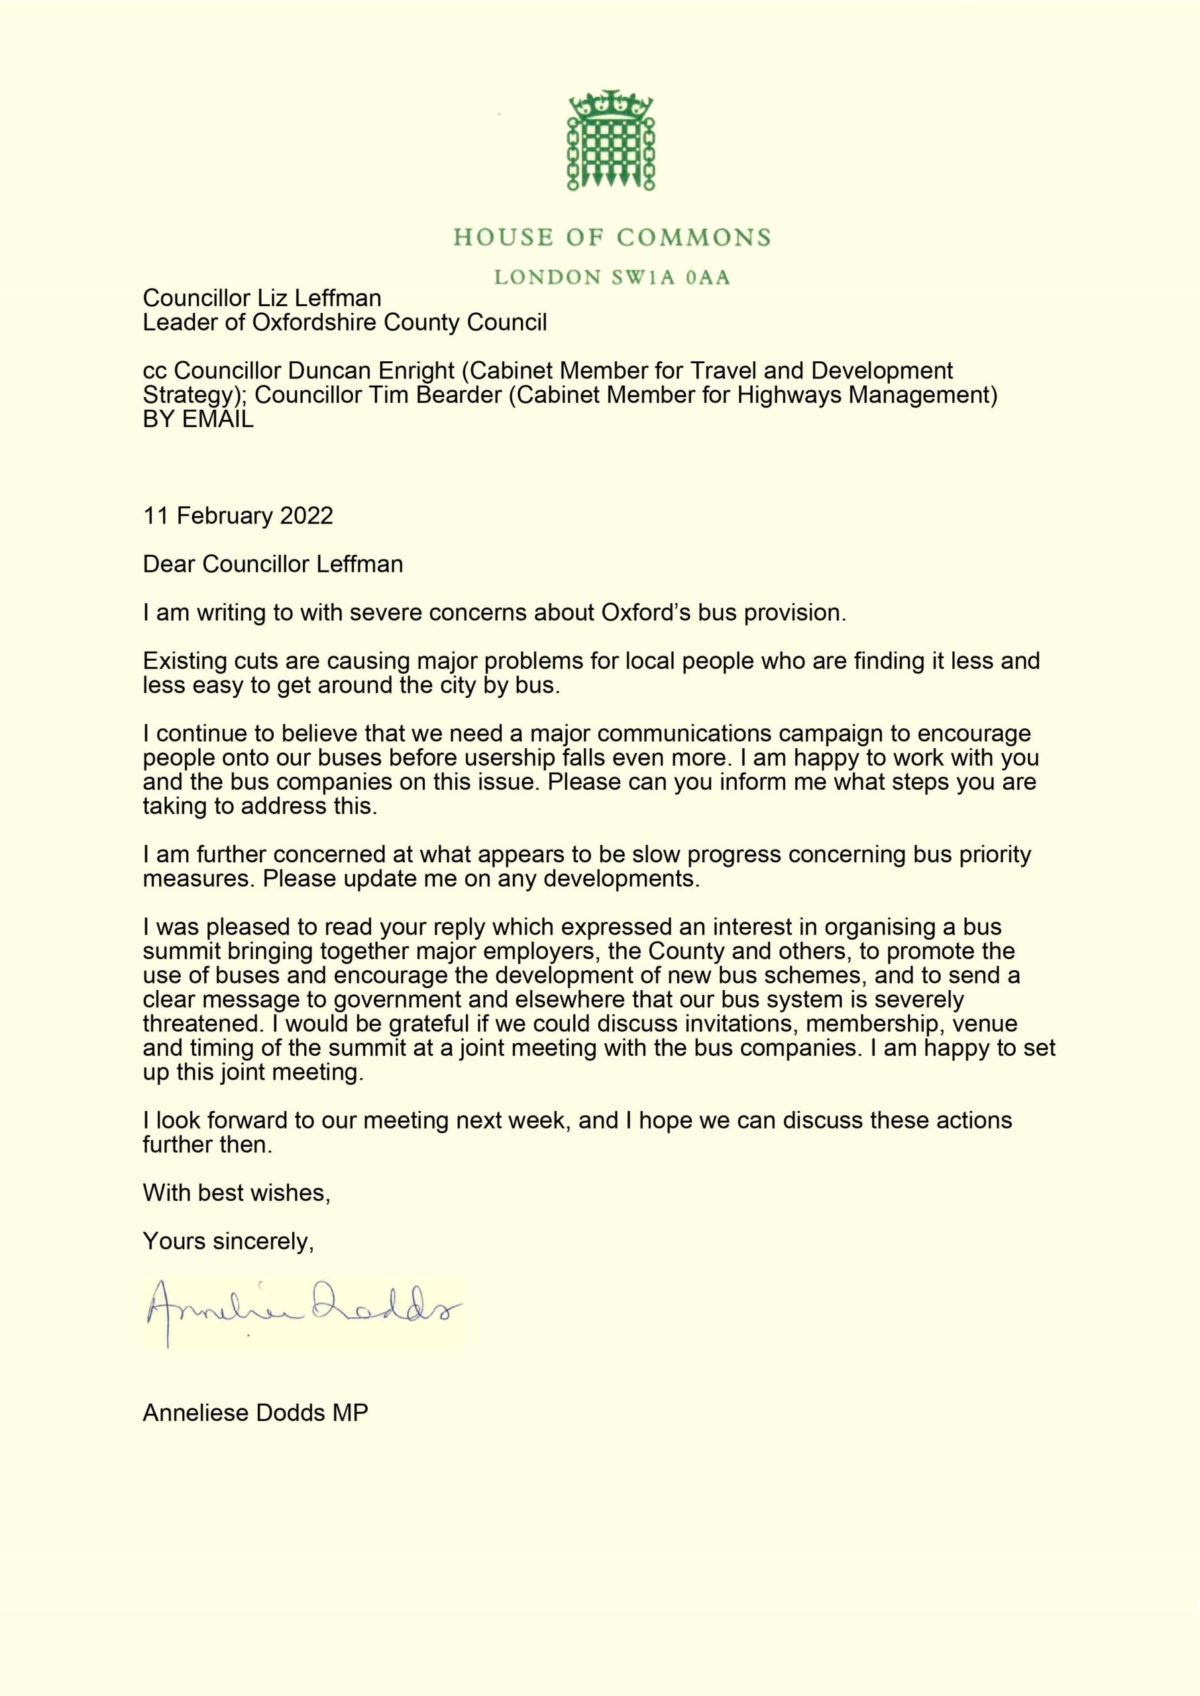 Letter from Anneliese Dodds to Liz Leffman regarding Oxford